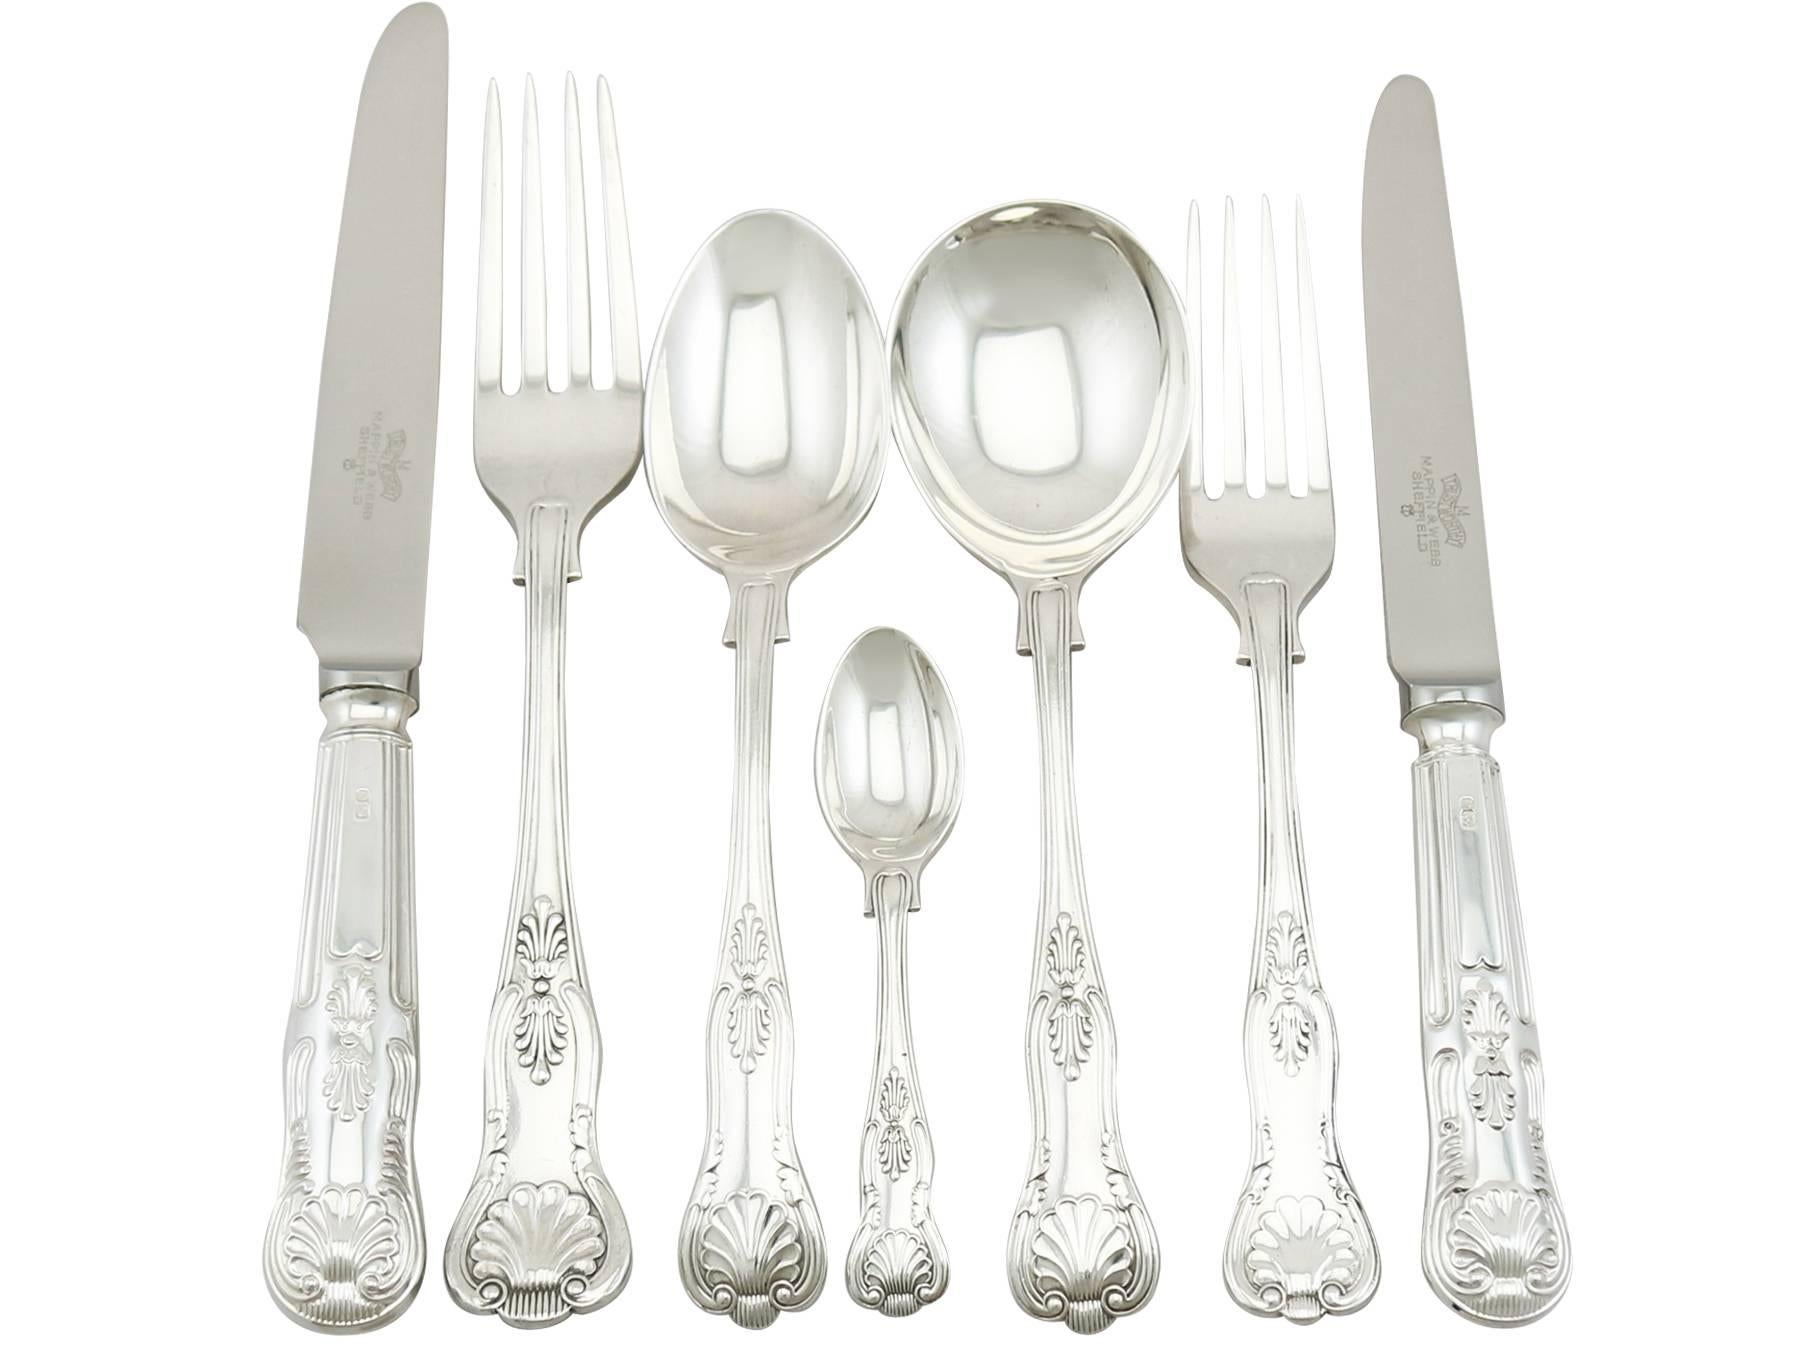 An exceptional, fine and impressive antique George V English sterling silver straight King's pattern flatware service for twelve persons; an addition to our canteen of cutlery collection.

The pieces of this fine, antique George V sterling silver